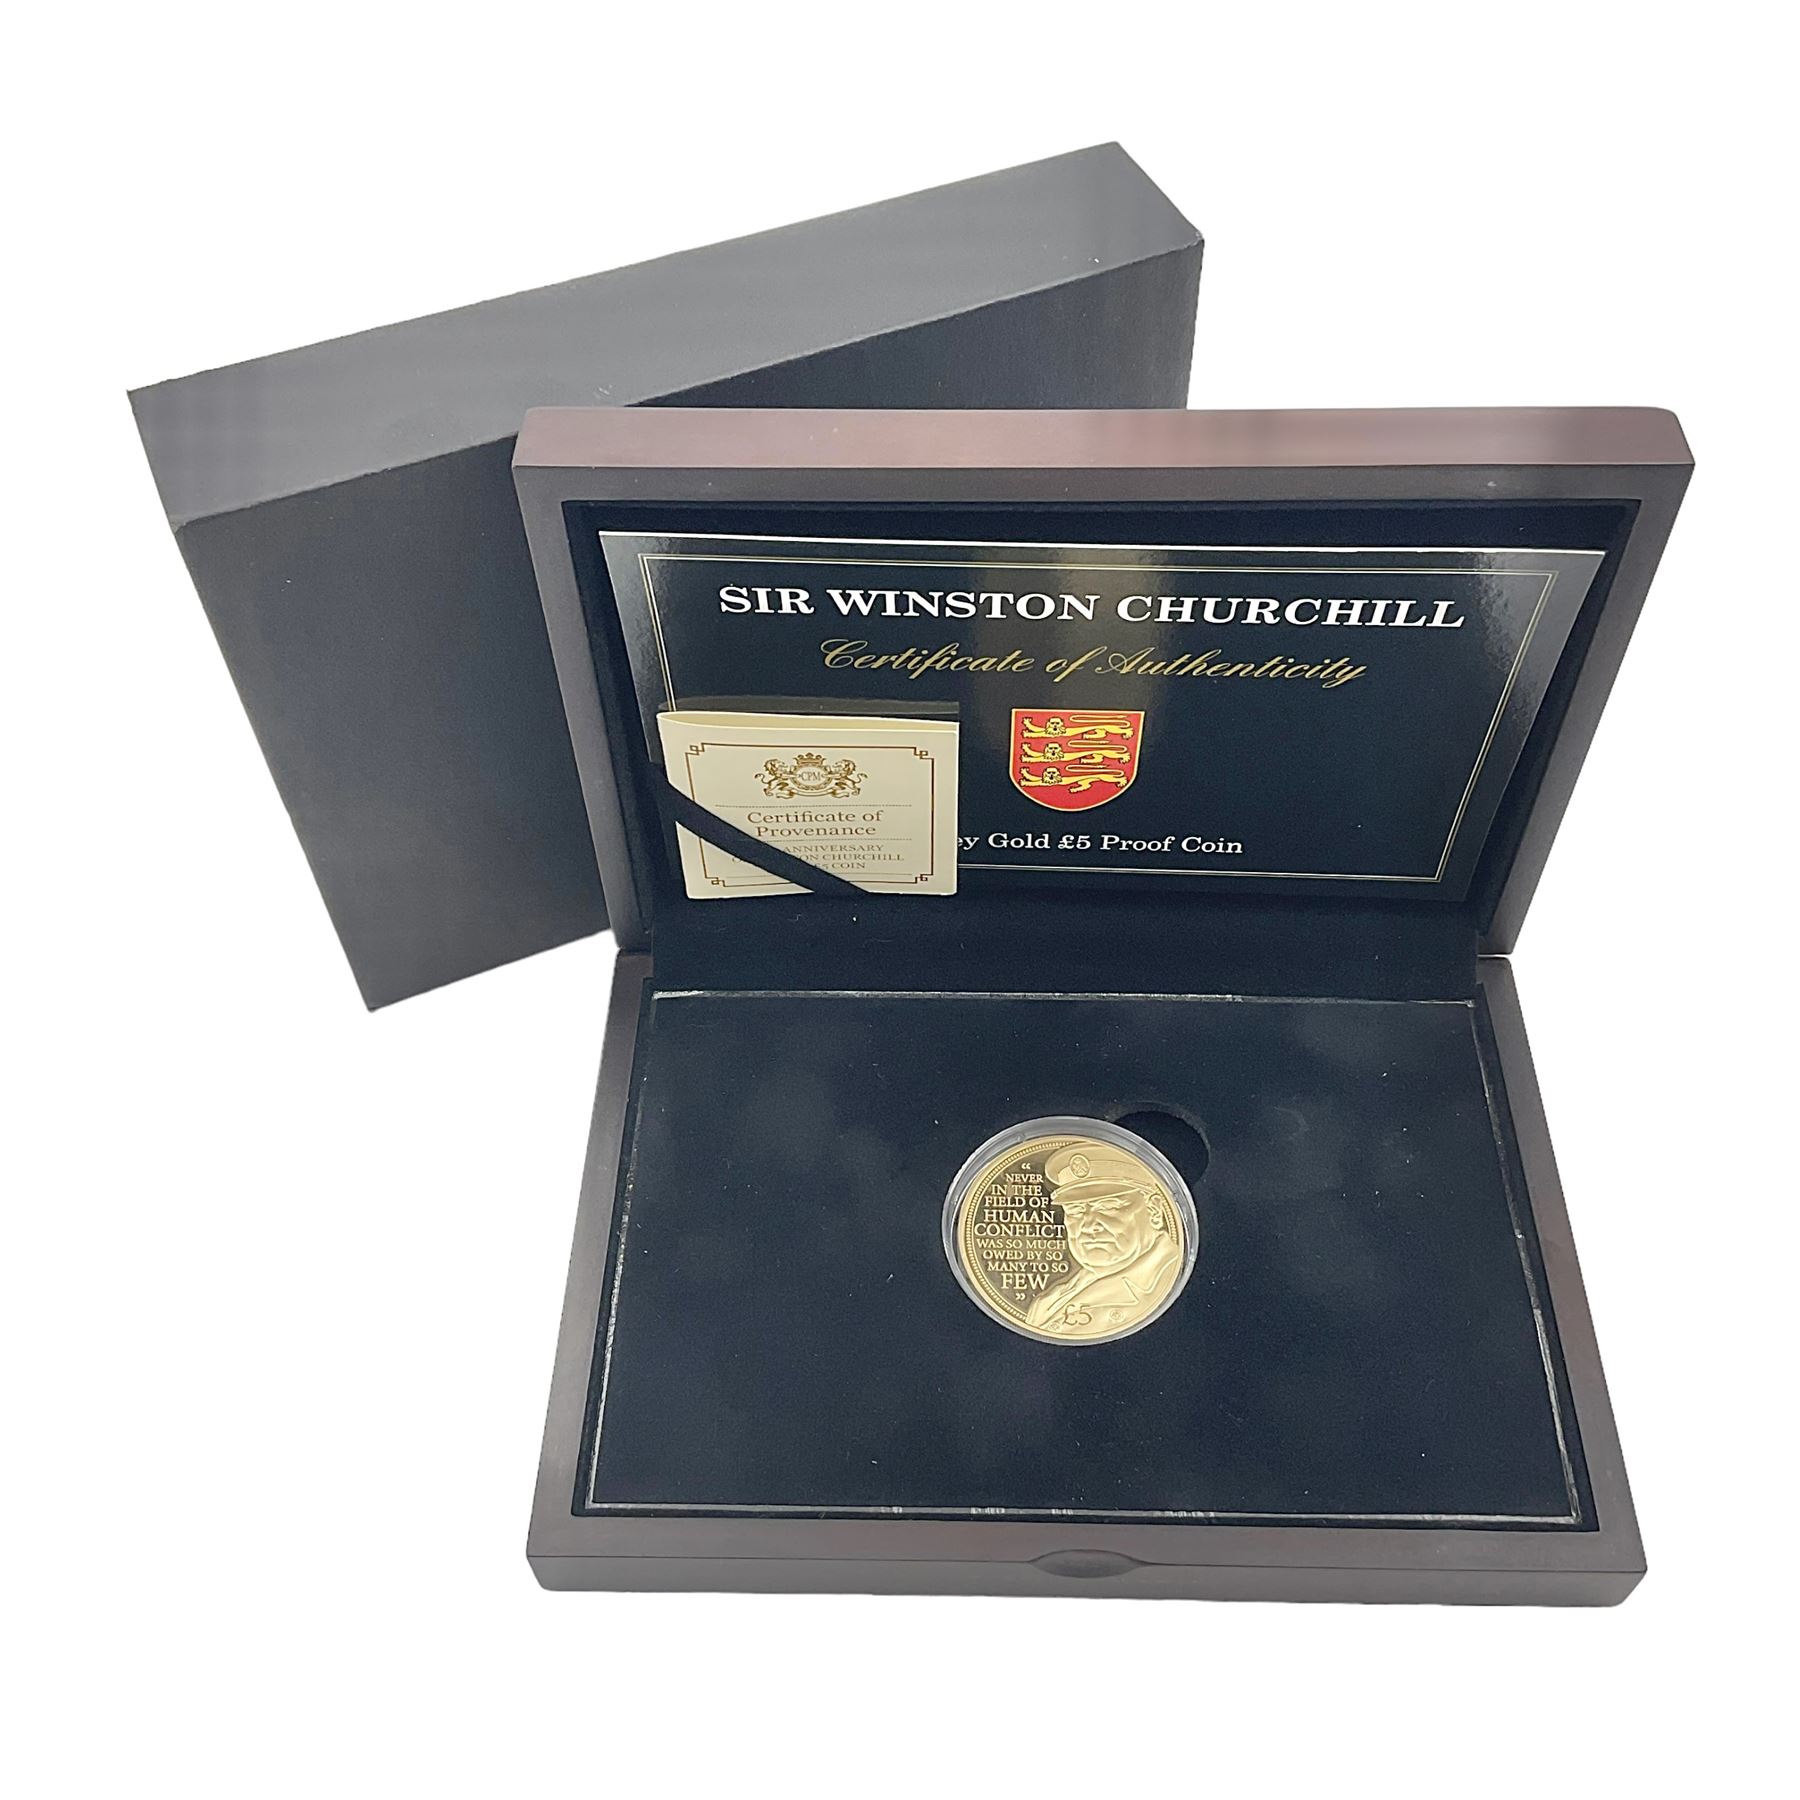 Queen Elizabeth II Bailiwick of Jersey 2015 'Sir Winston Churchill' gold proof five pound coin